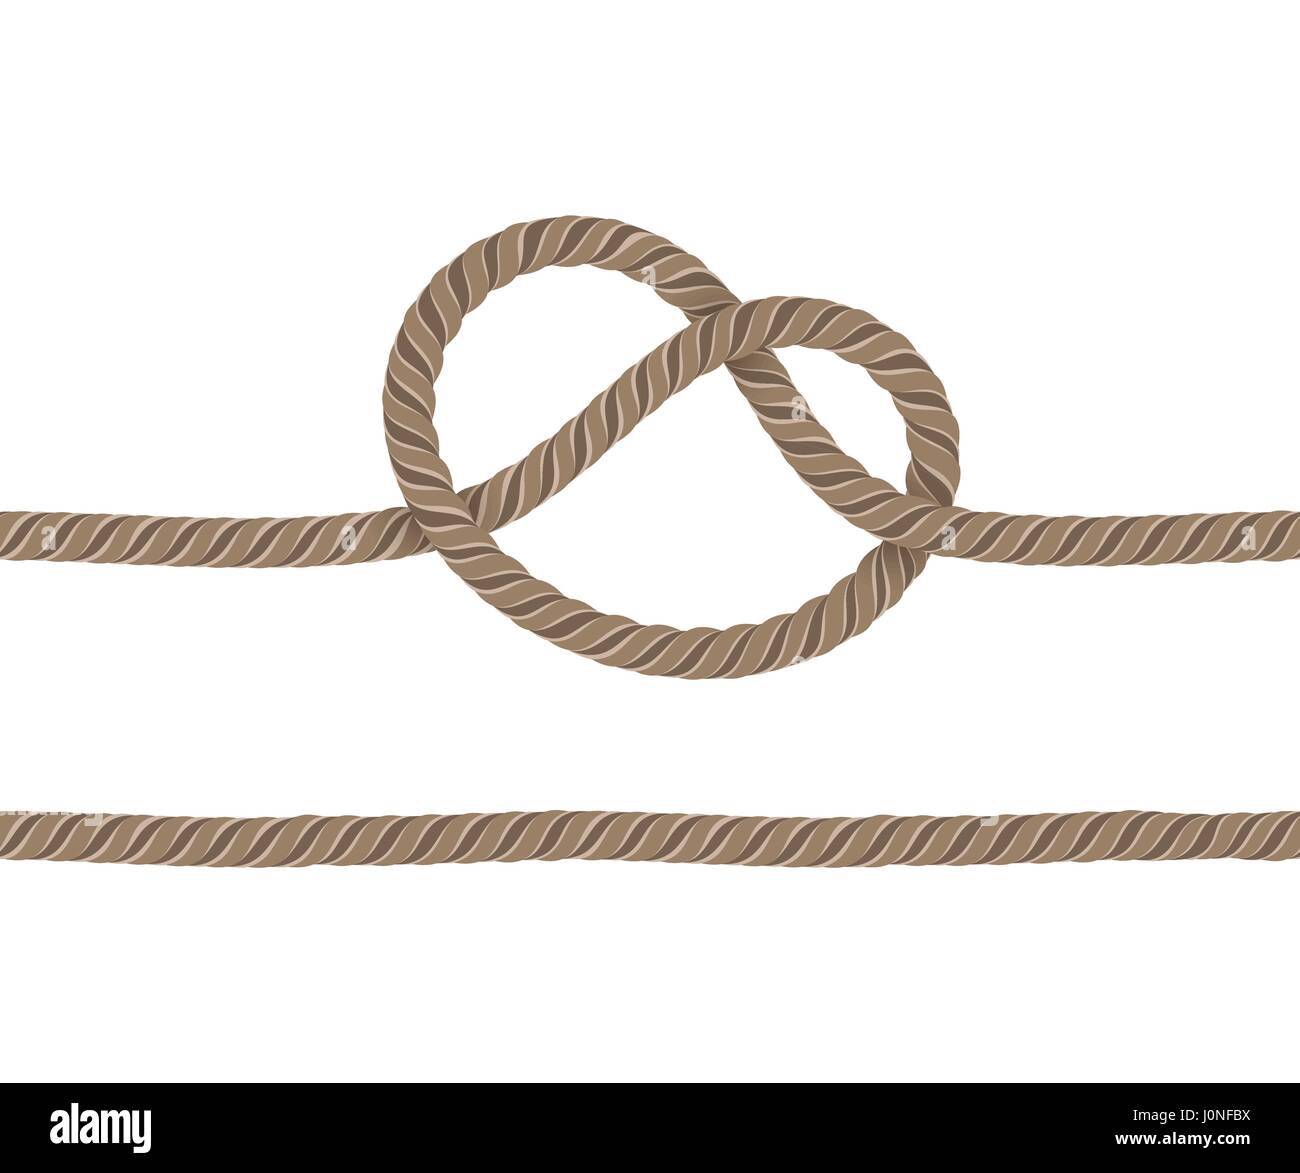 Rope is knotted Stock Vector